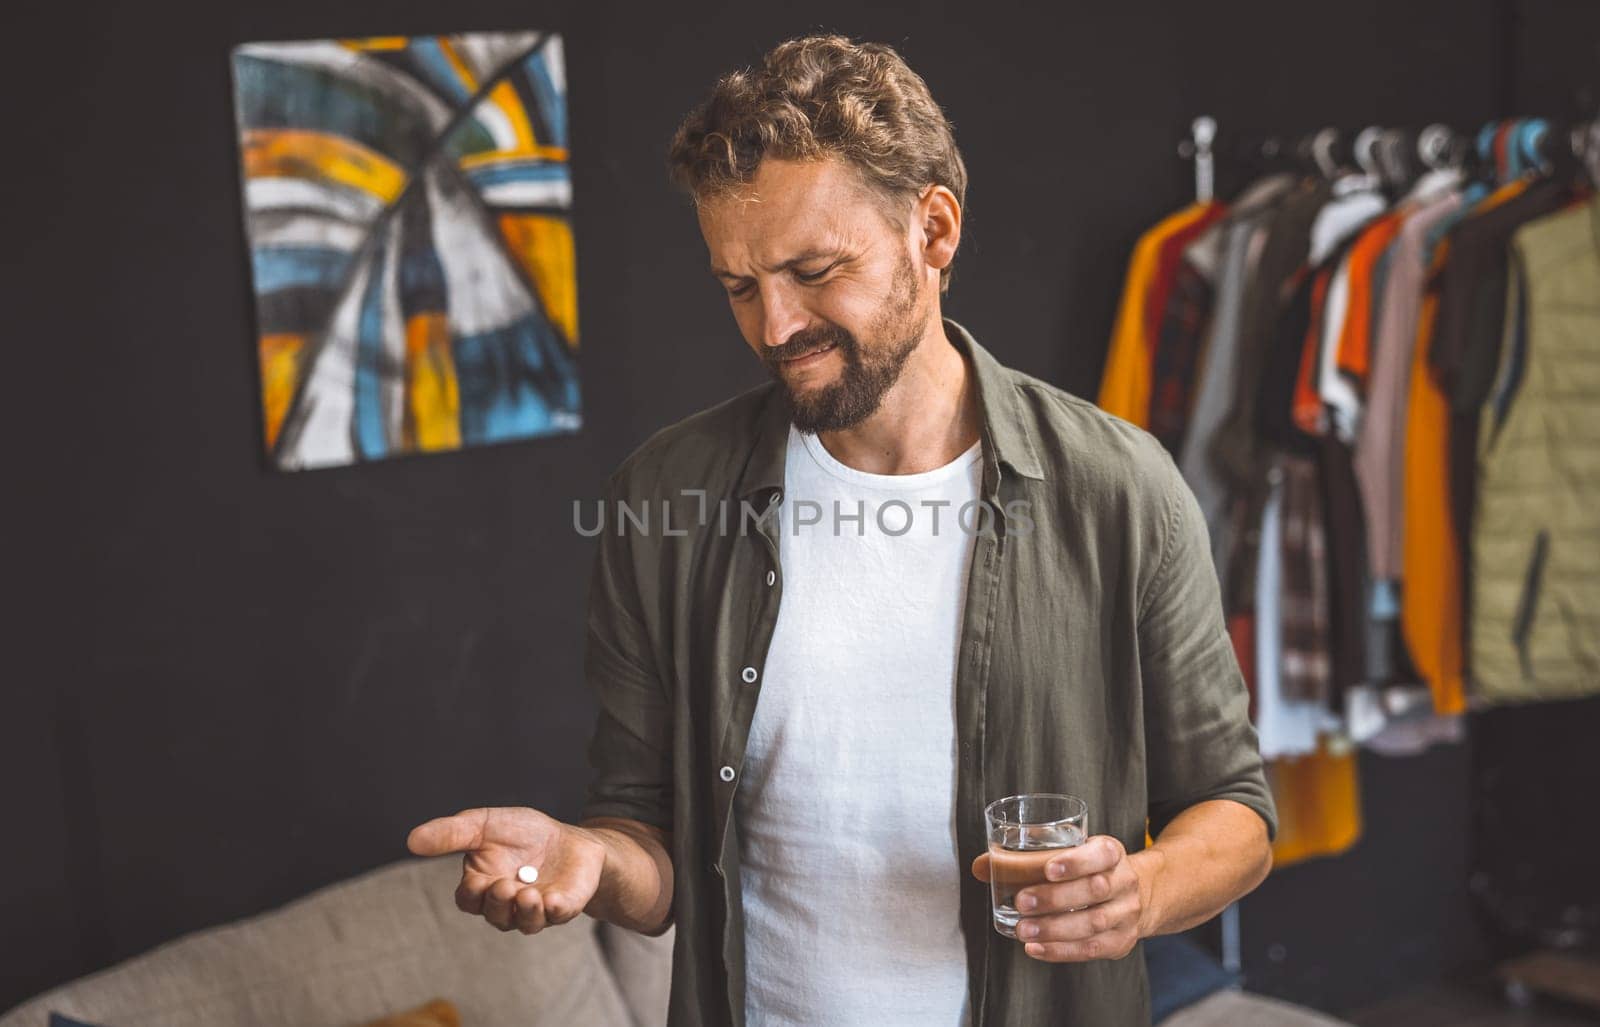 Man holding pill in one hand and glass of water in the other, isolated at home. Concepts of healthcare, wellness, and staying home for quarantine or isolation. The man is indoors and focused on taking his medication, while the glass of water provides a sense of refreshment and hydration. High quality photo